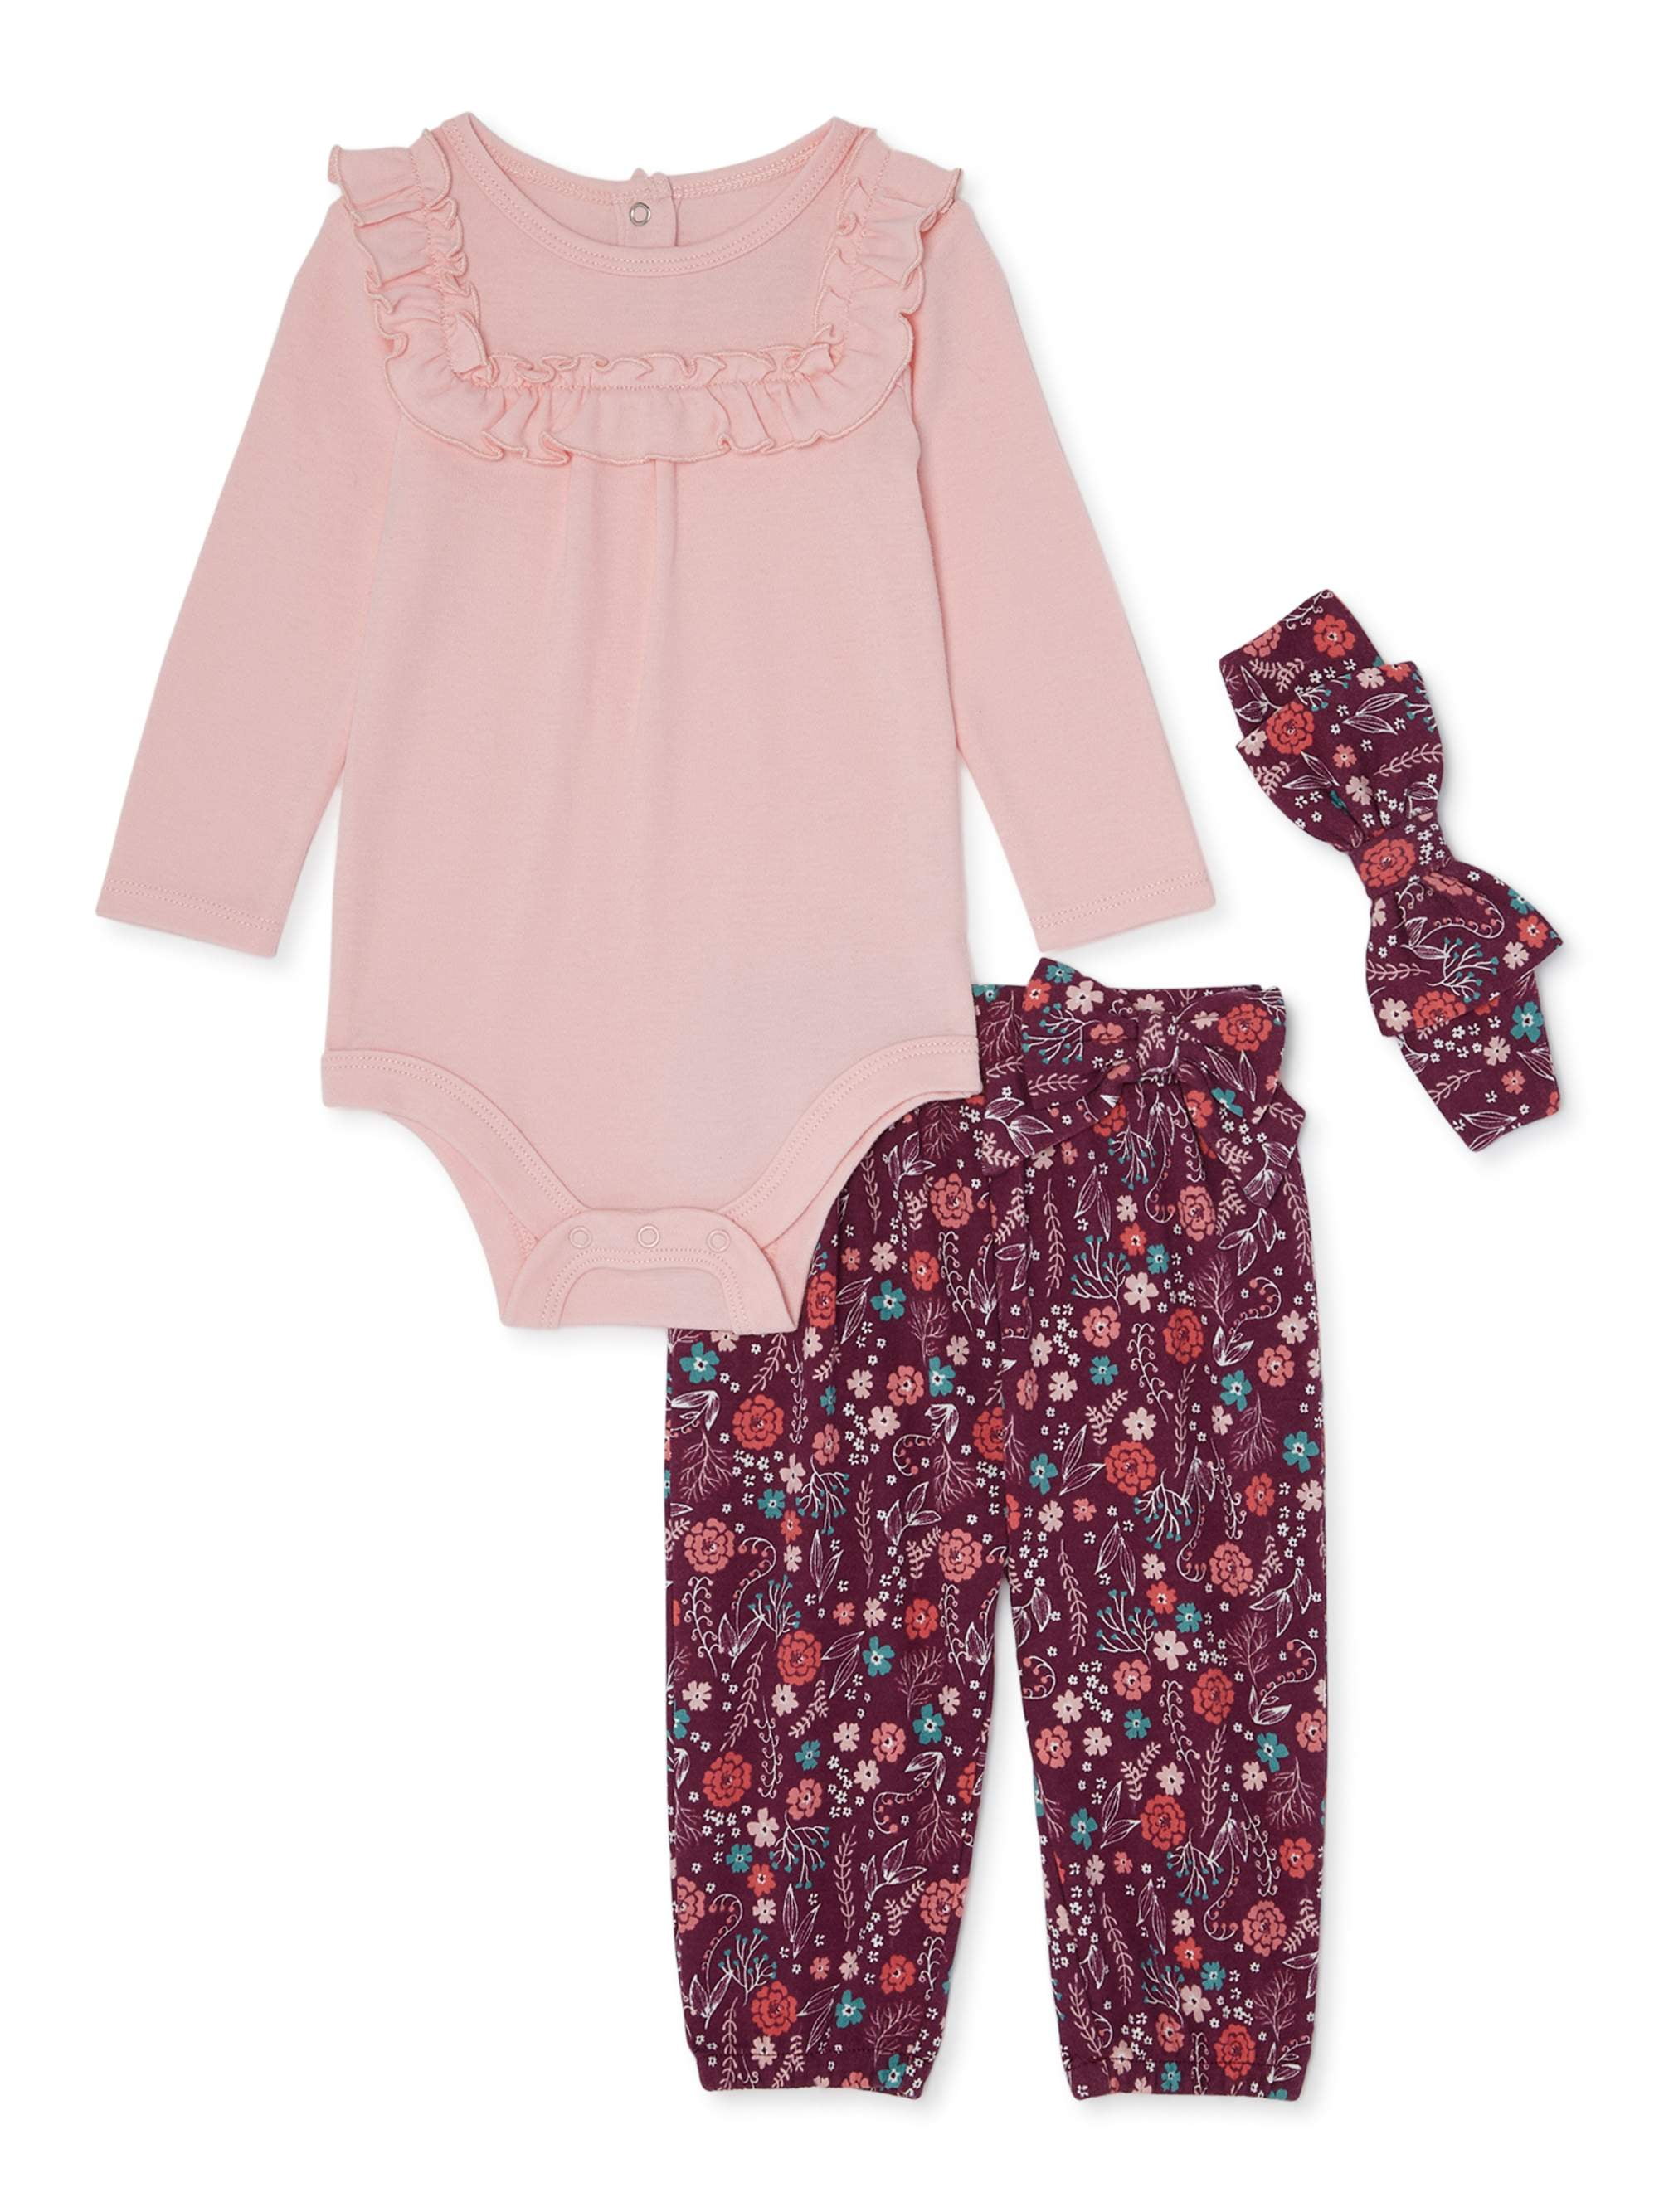 walmart clearance baby girl clothes